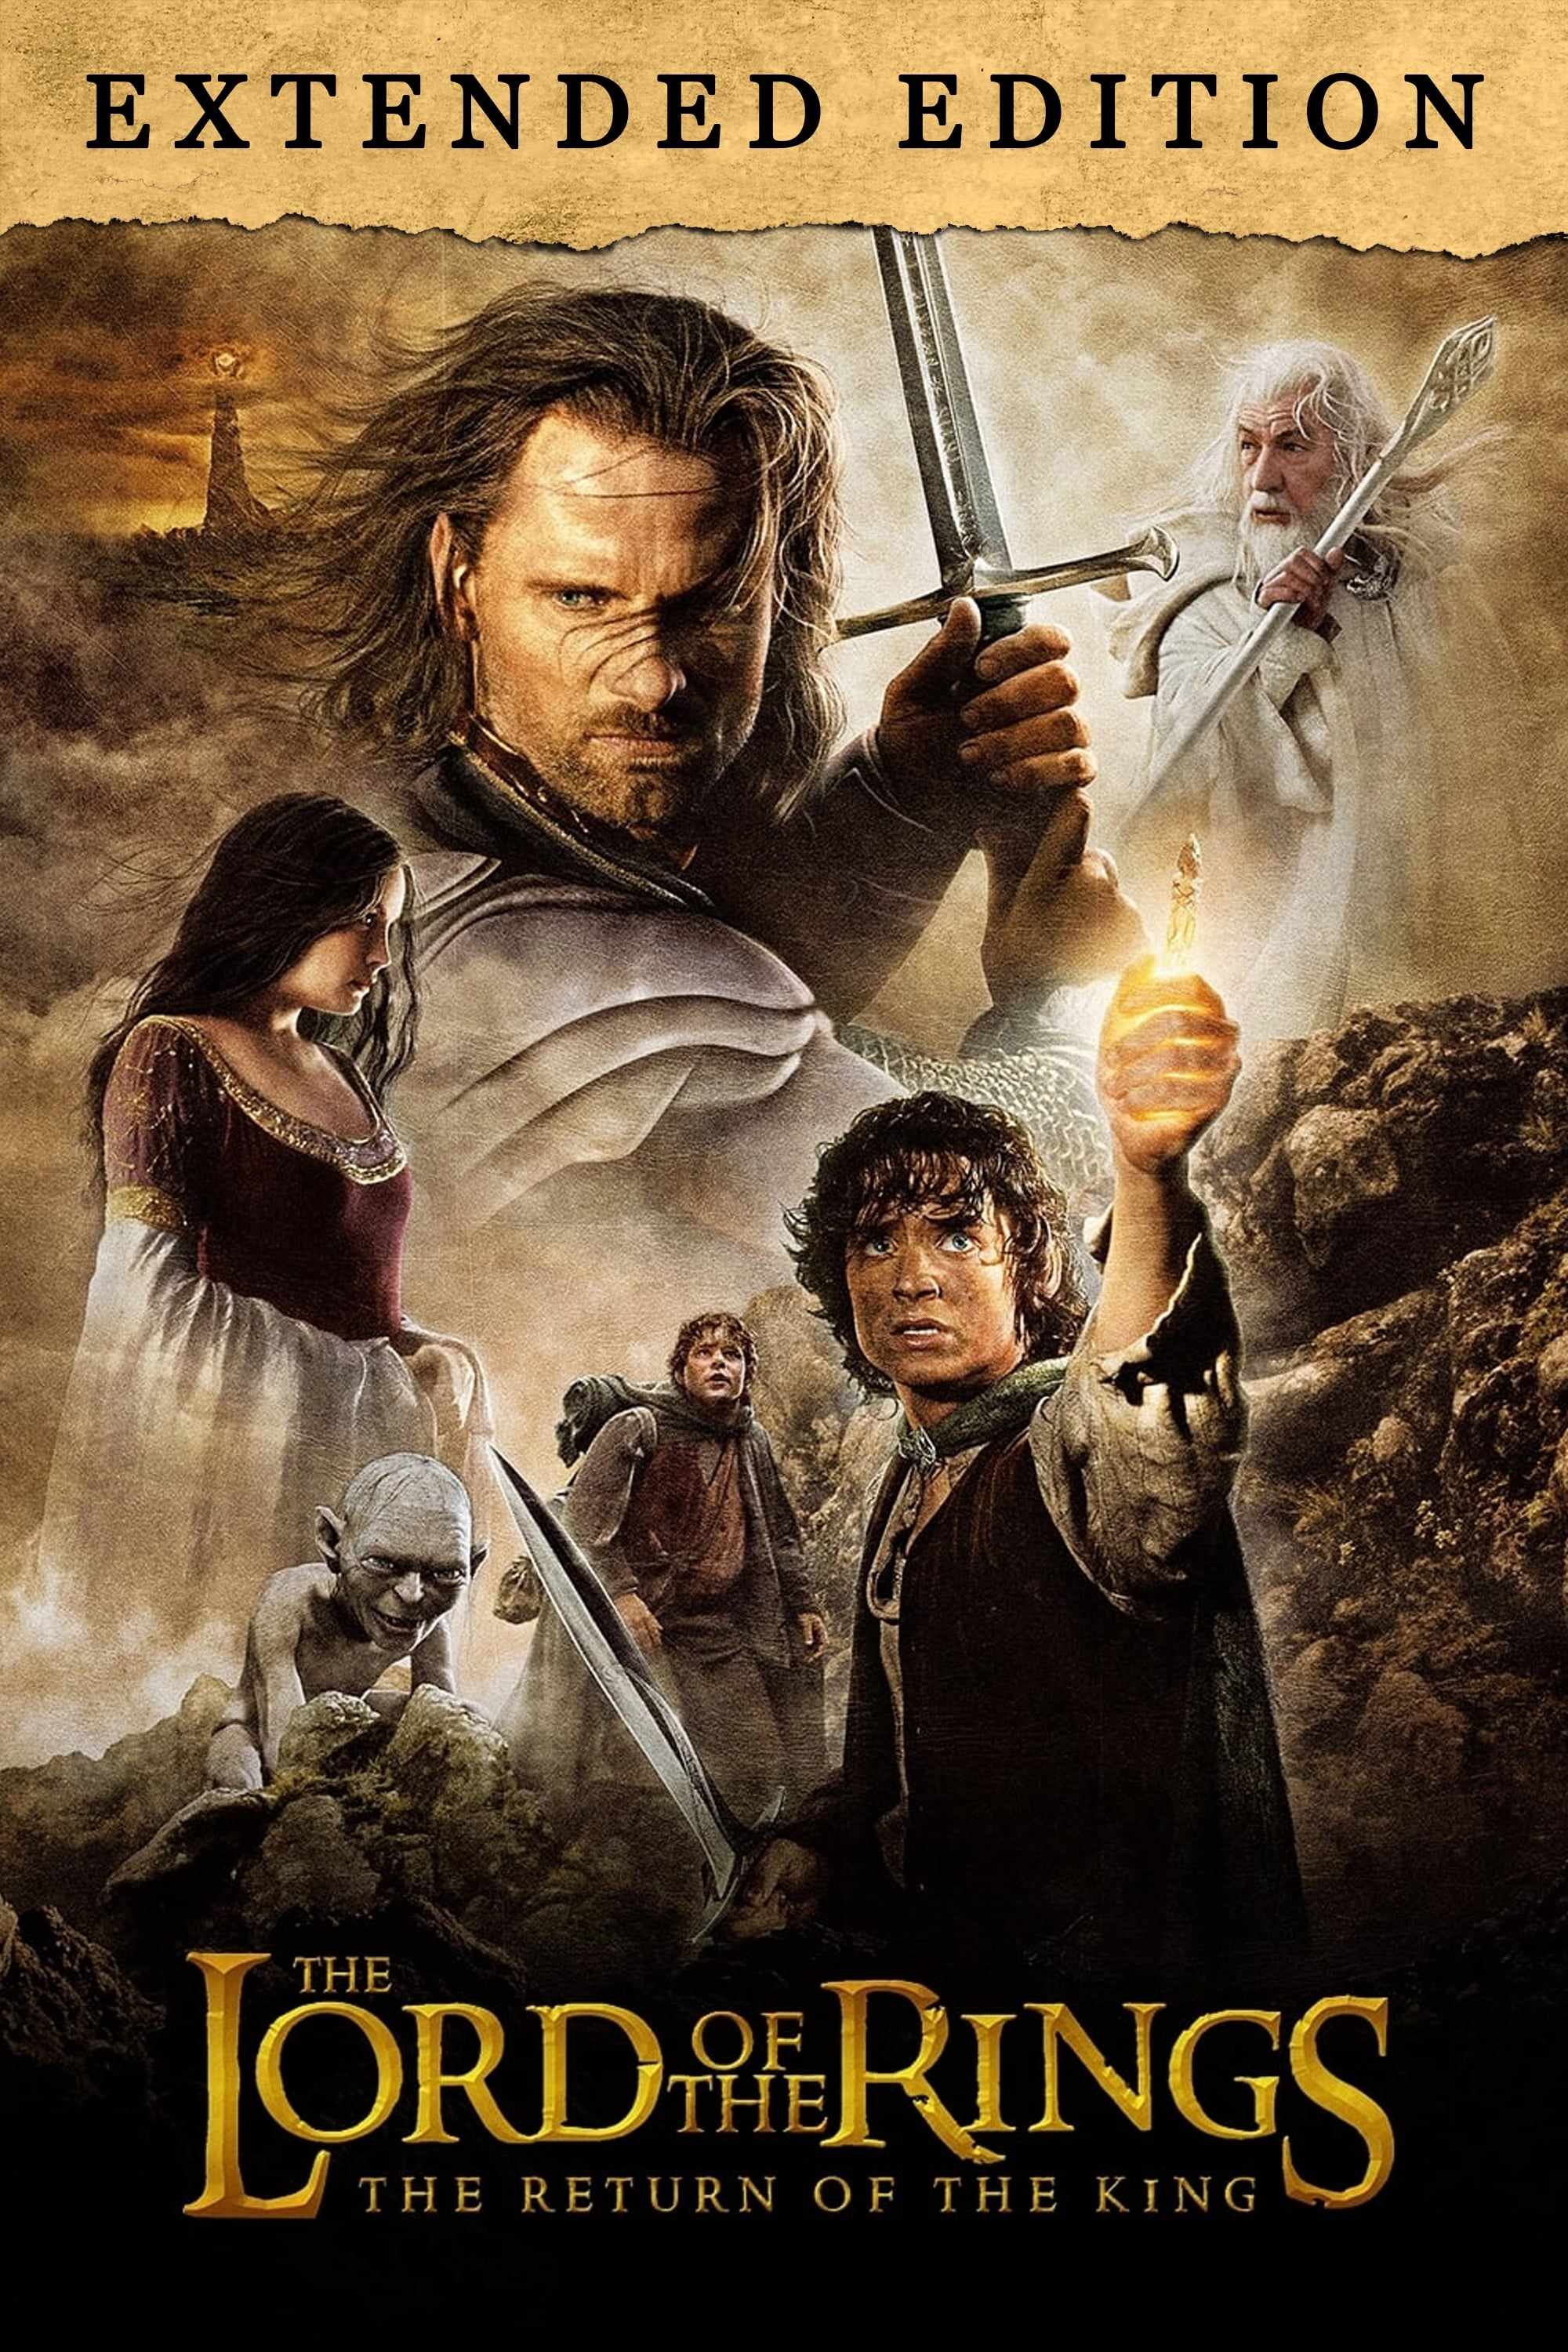 LOTR - The Return of the King